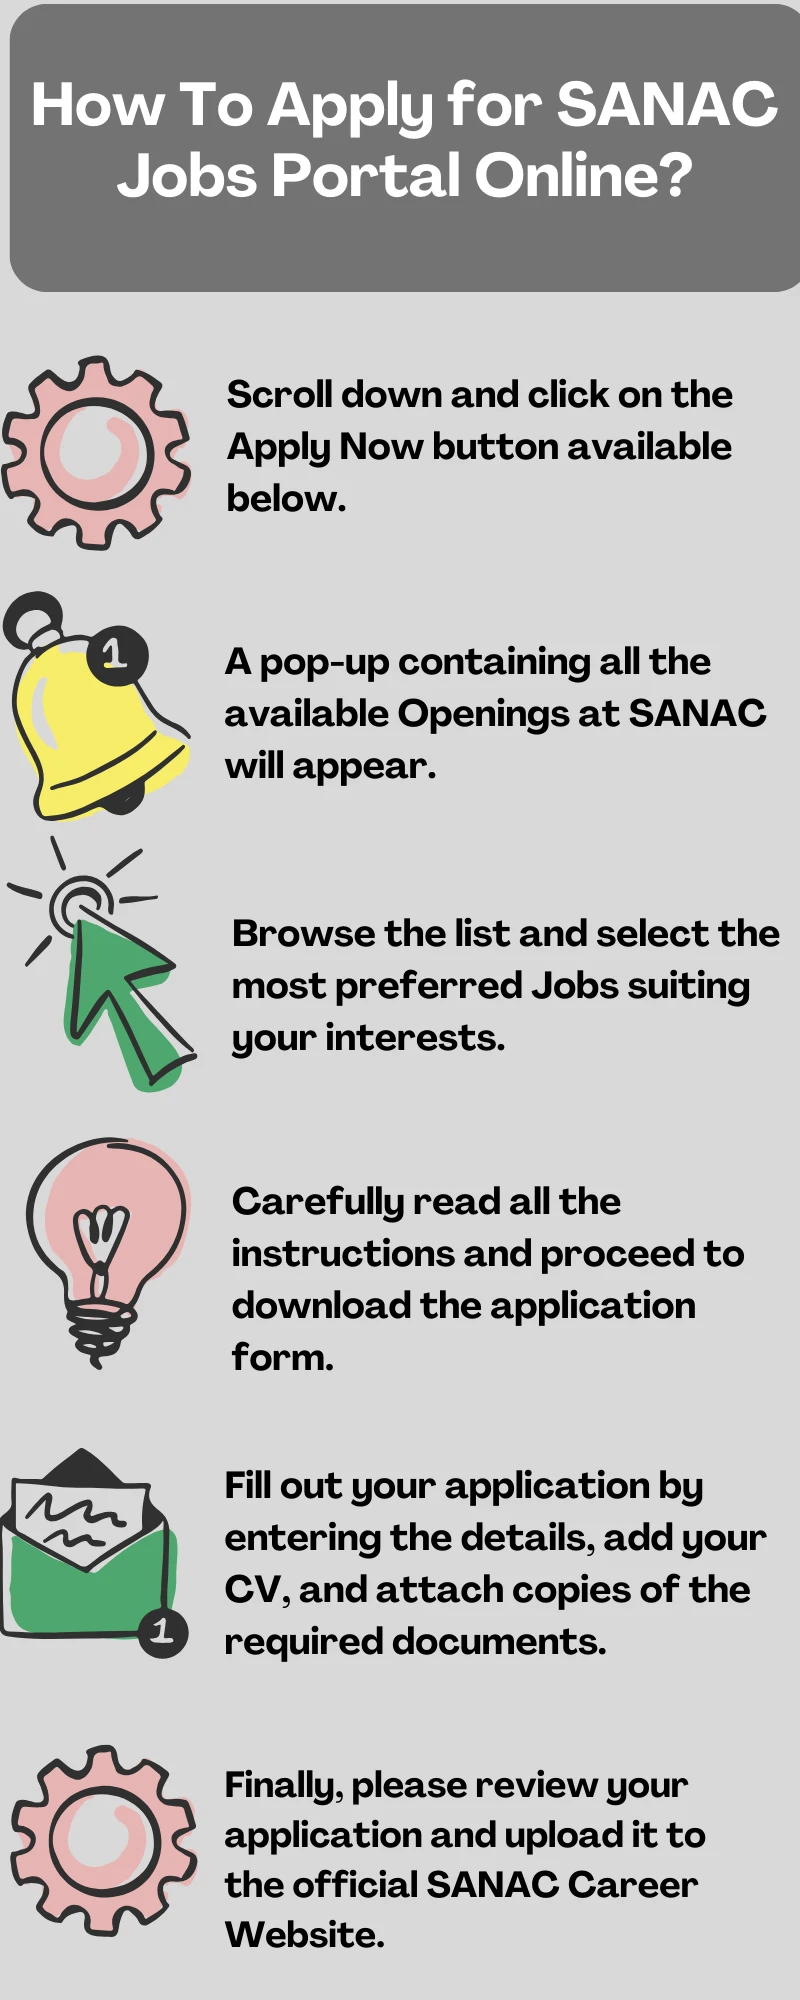 How To Apply for SANAC Jobs Portal Online?